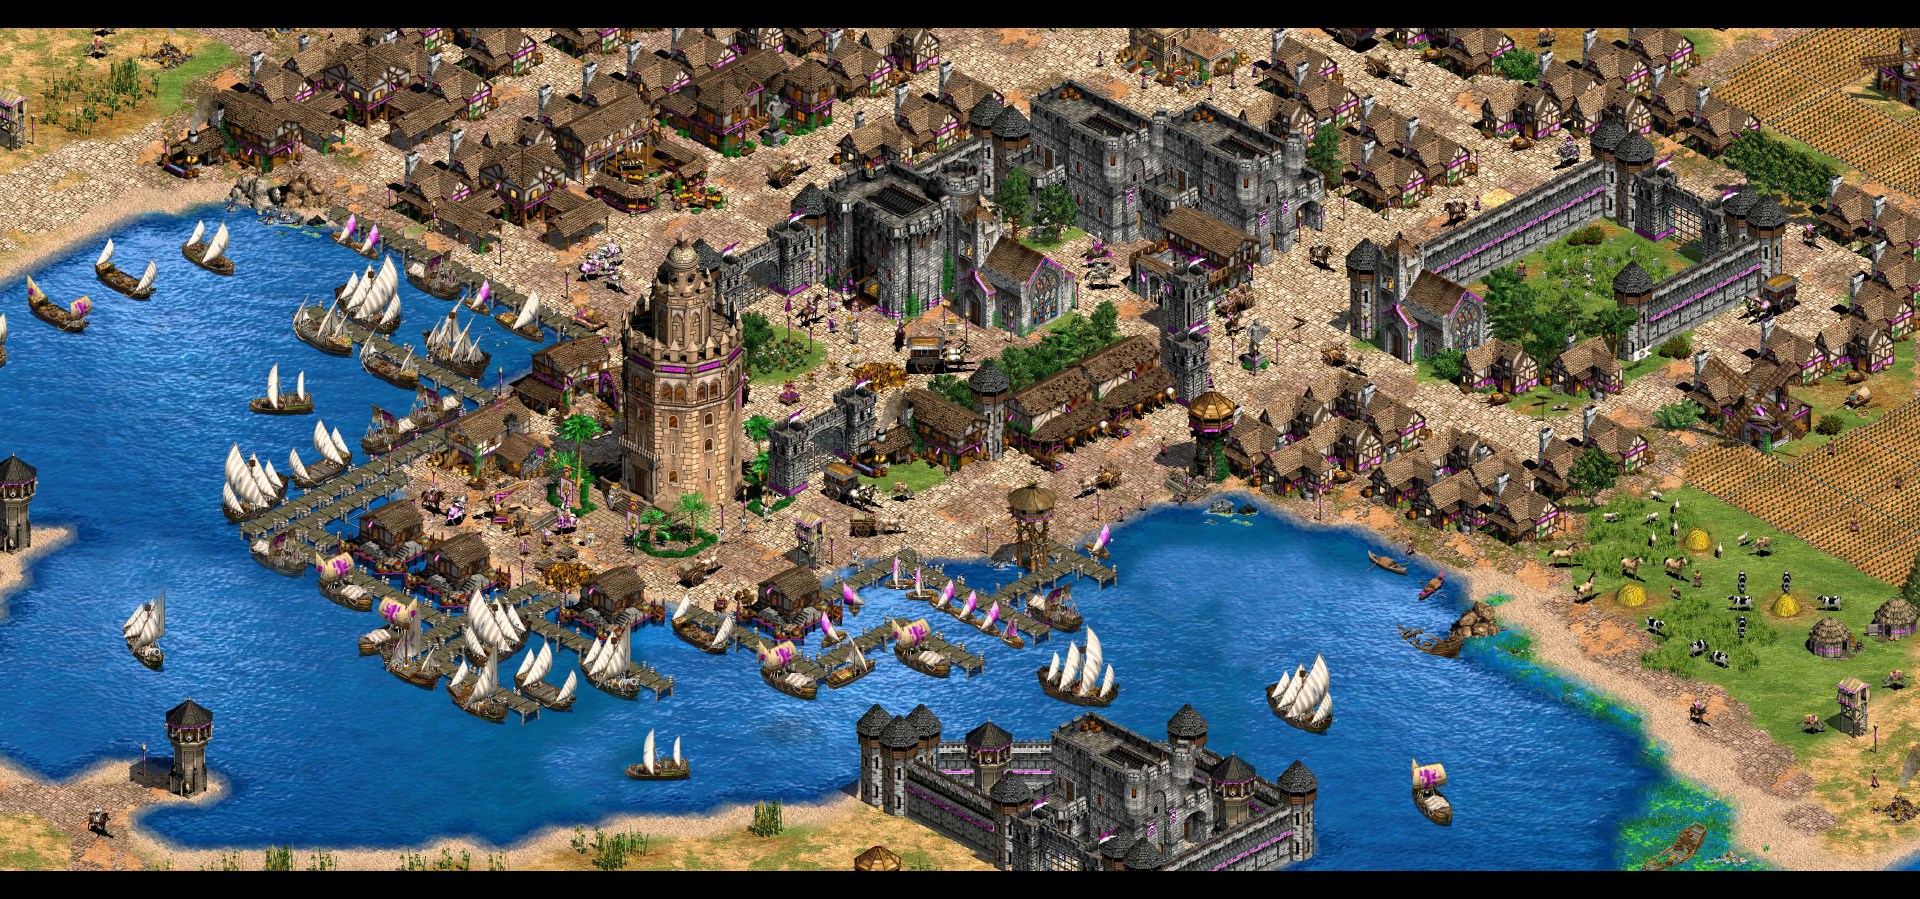 More Age of Empires? Sounds good to us!